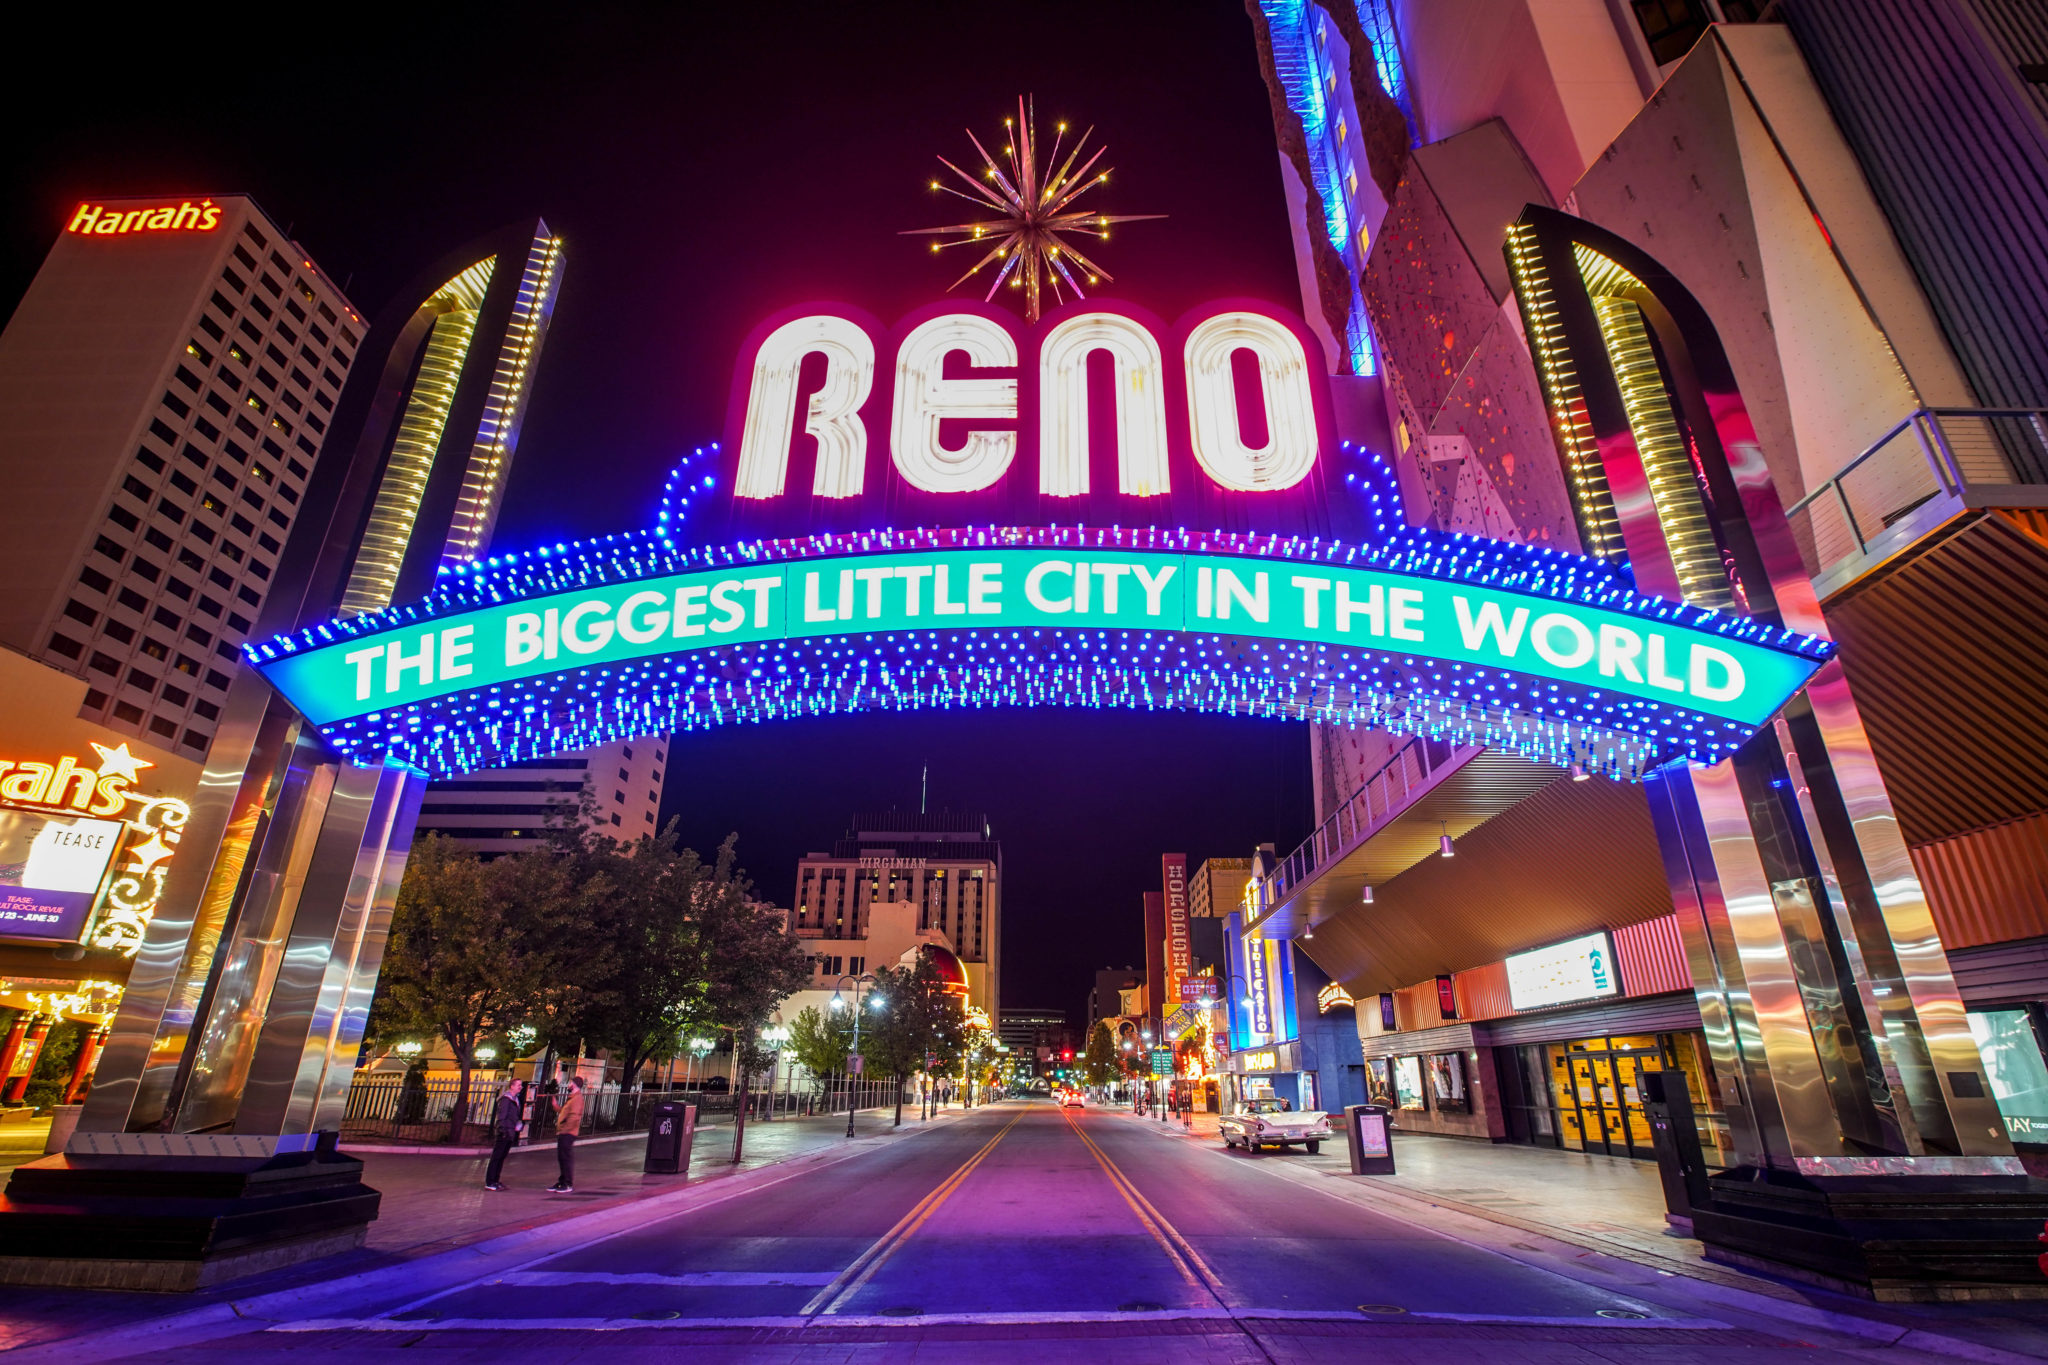 Reno's iconic sign at night that reads "The Biggest Little City in the World"